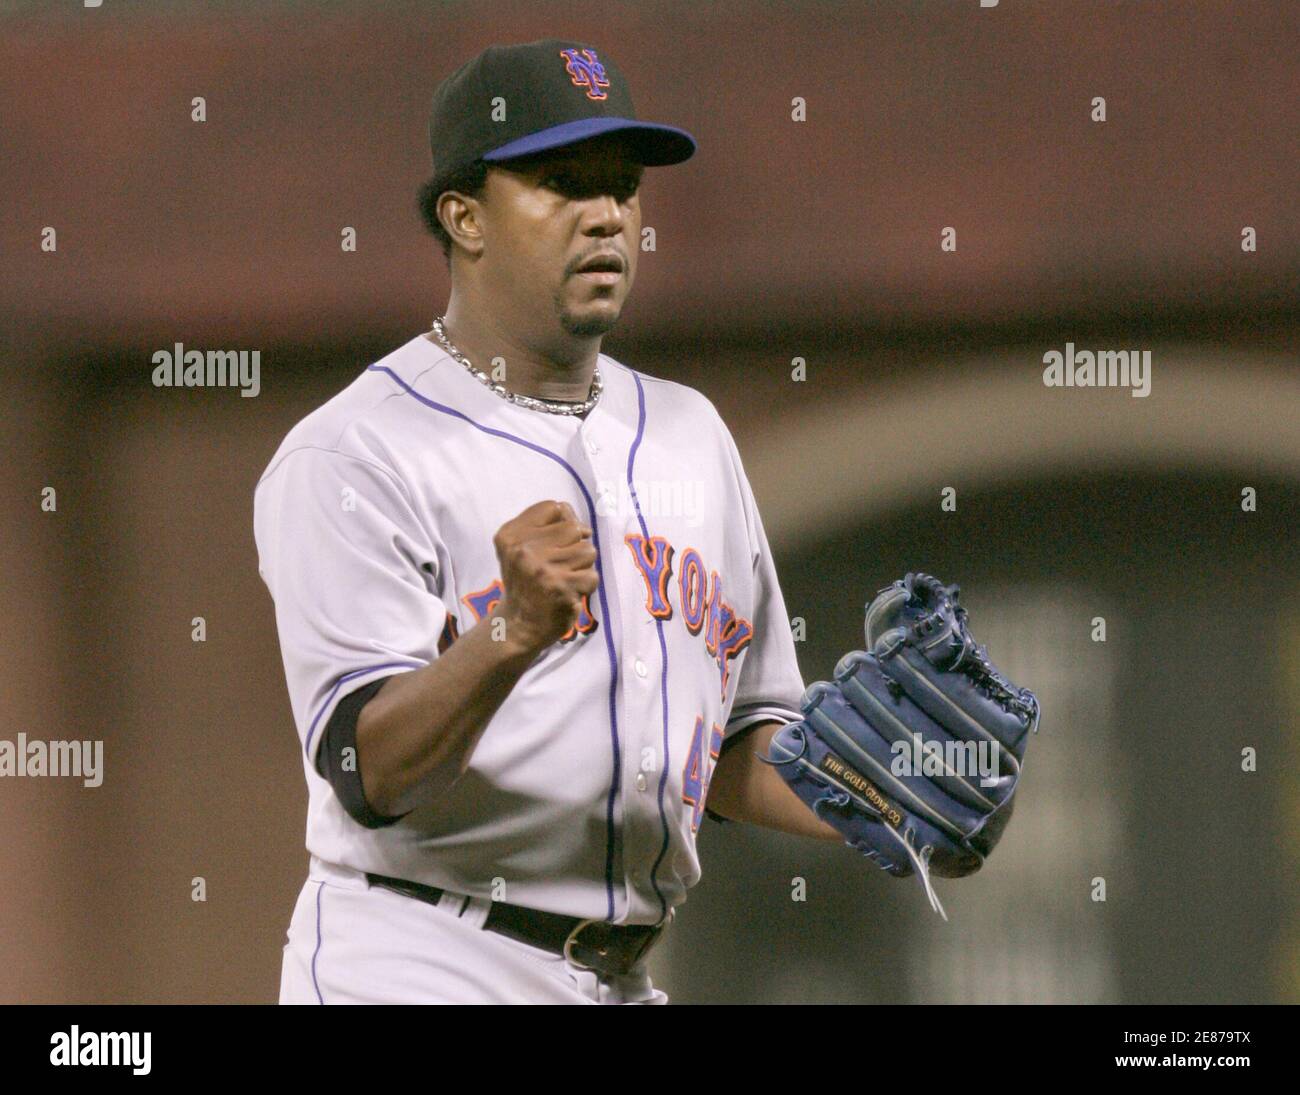 New York Mets starting pitcher Pedro Martinez reacts after recording a strikeout in the sixth inning against the San Francisco Giants during their MLB National League baseball game in San Francisco, California June 3, 2008.  REUTERS/Robert Galbraith (UNITED STATES) Stock Photo